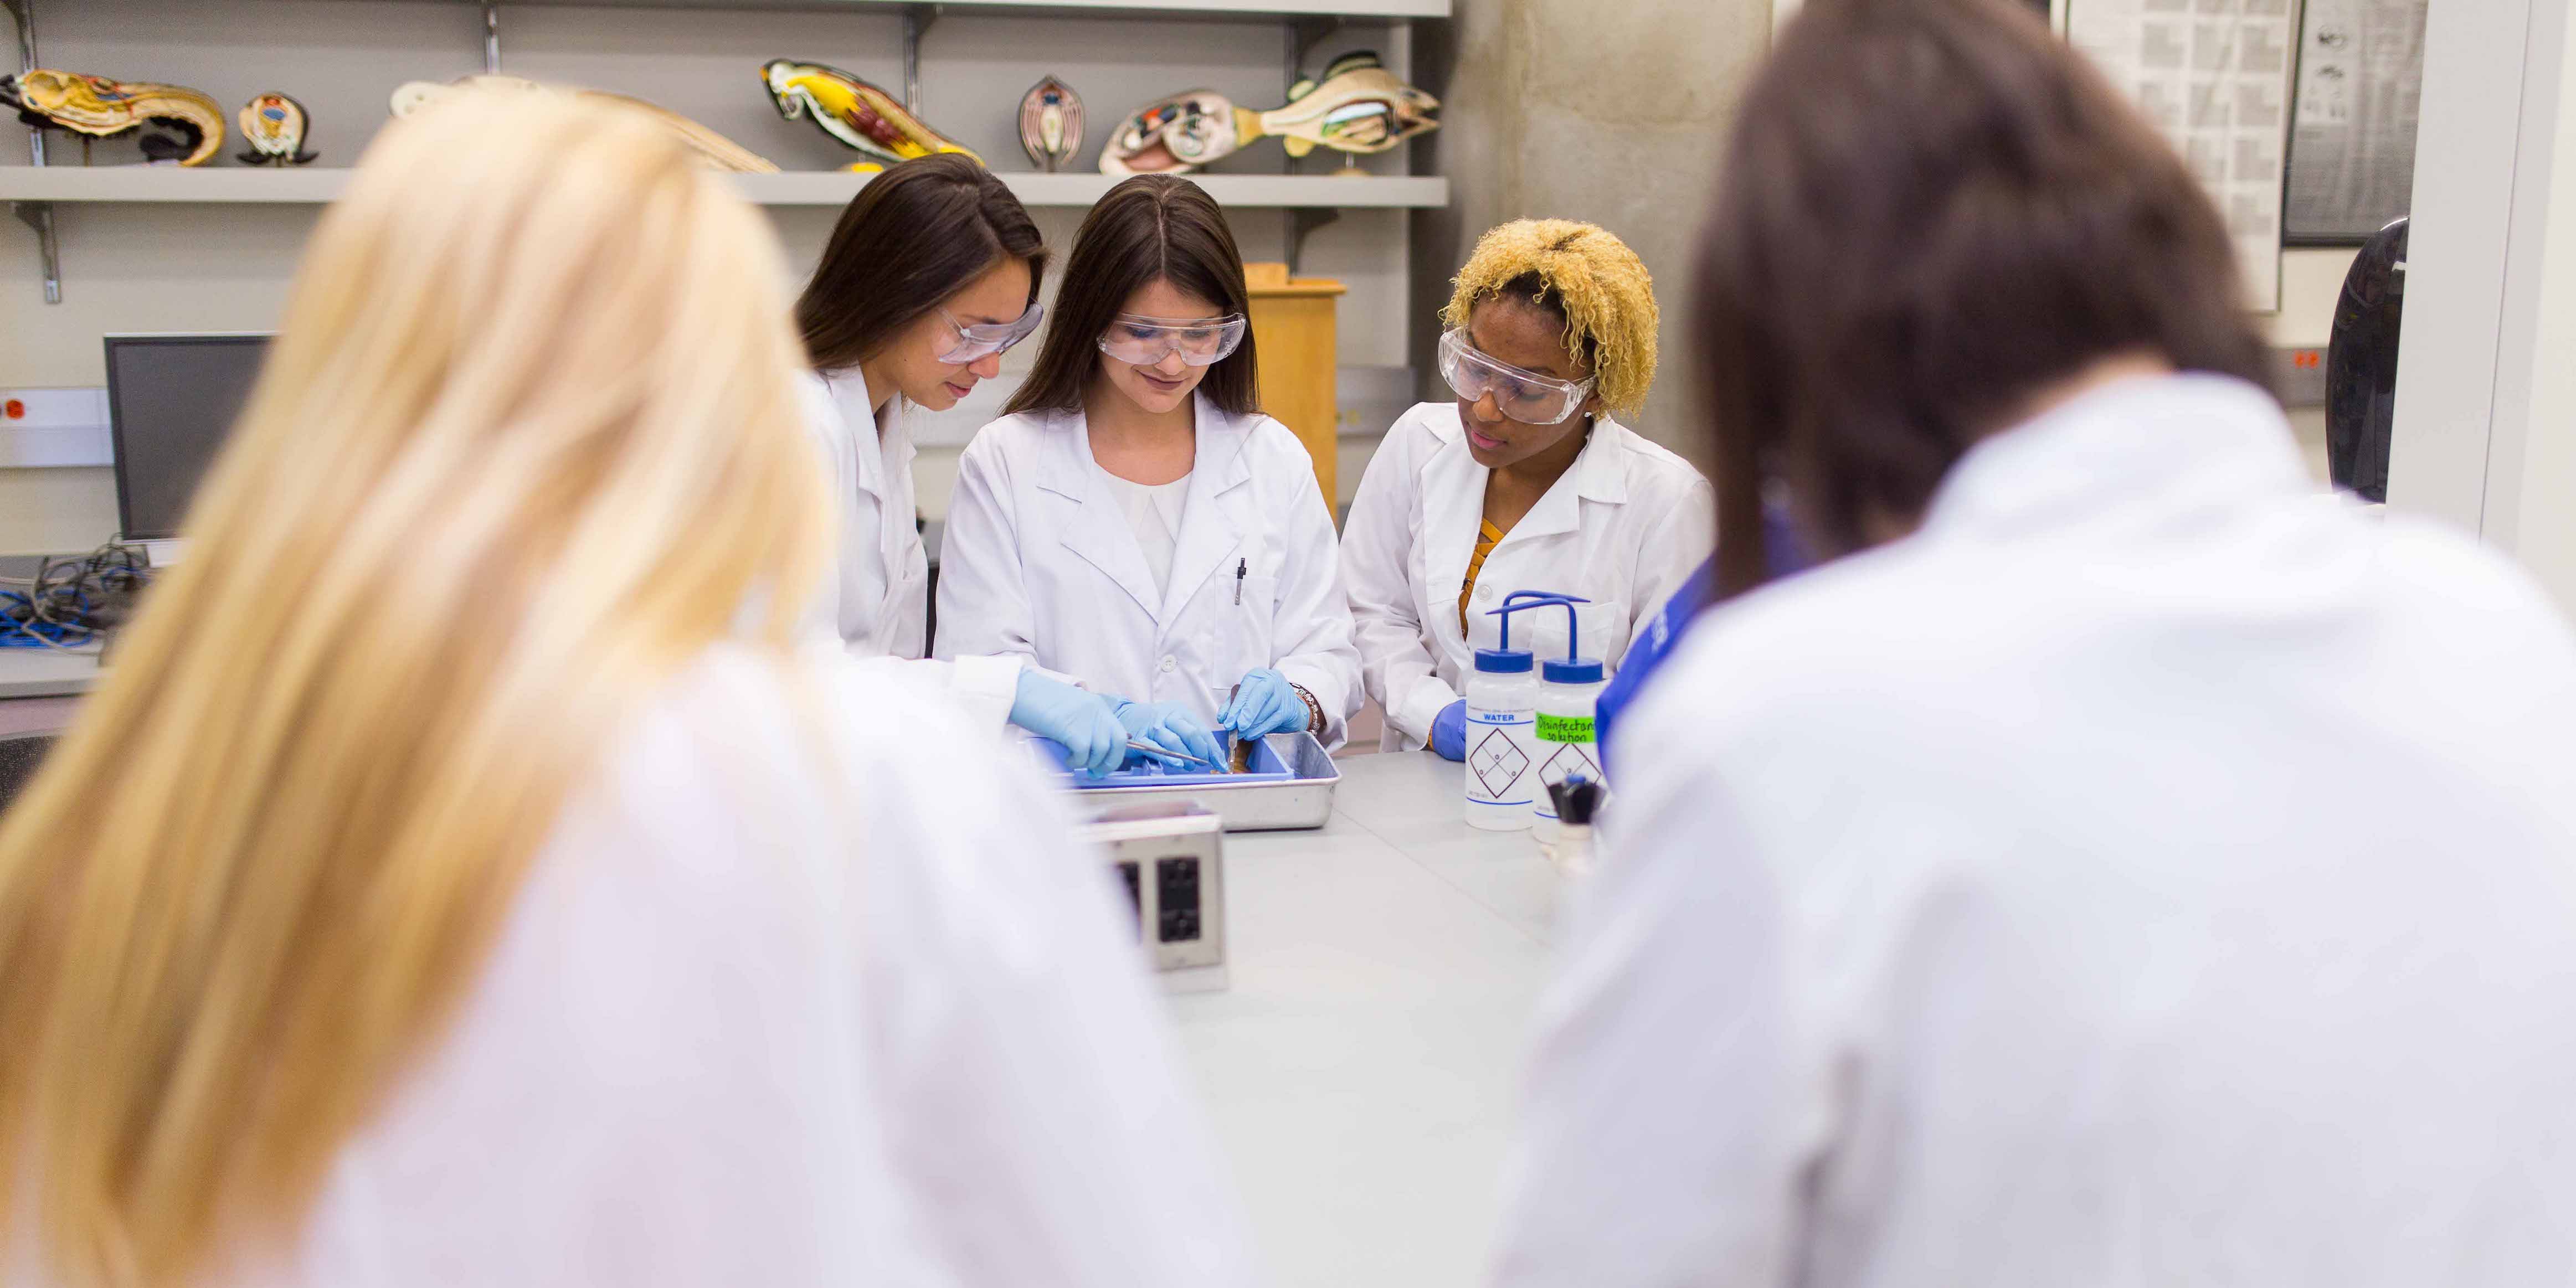 three female students in lab wearing lab coats and safety glasses while dissecting organism